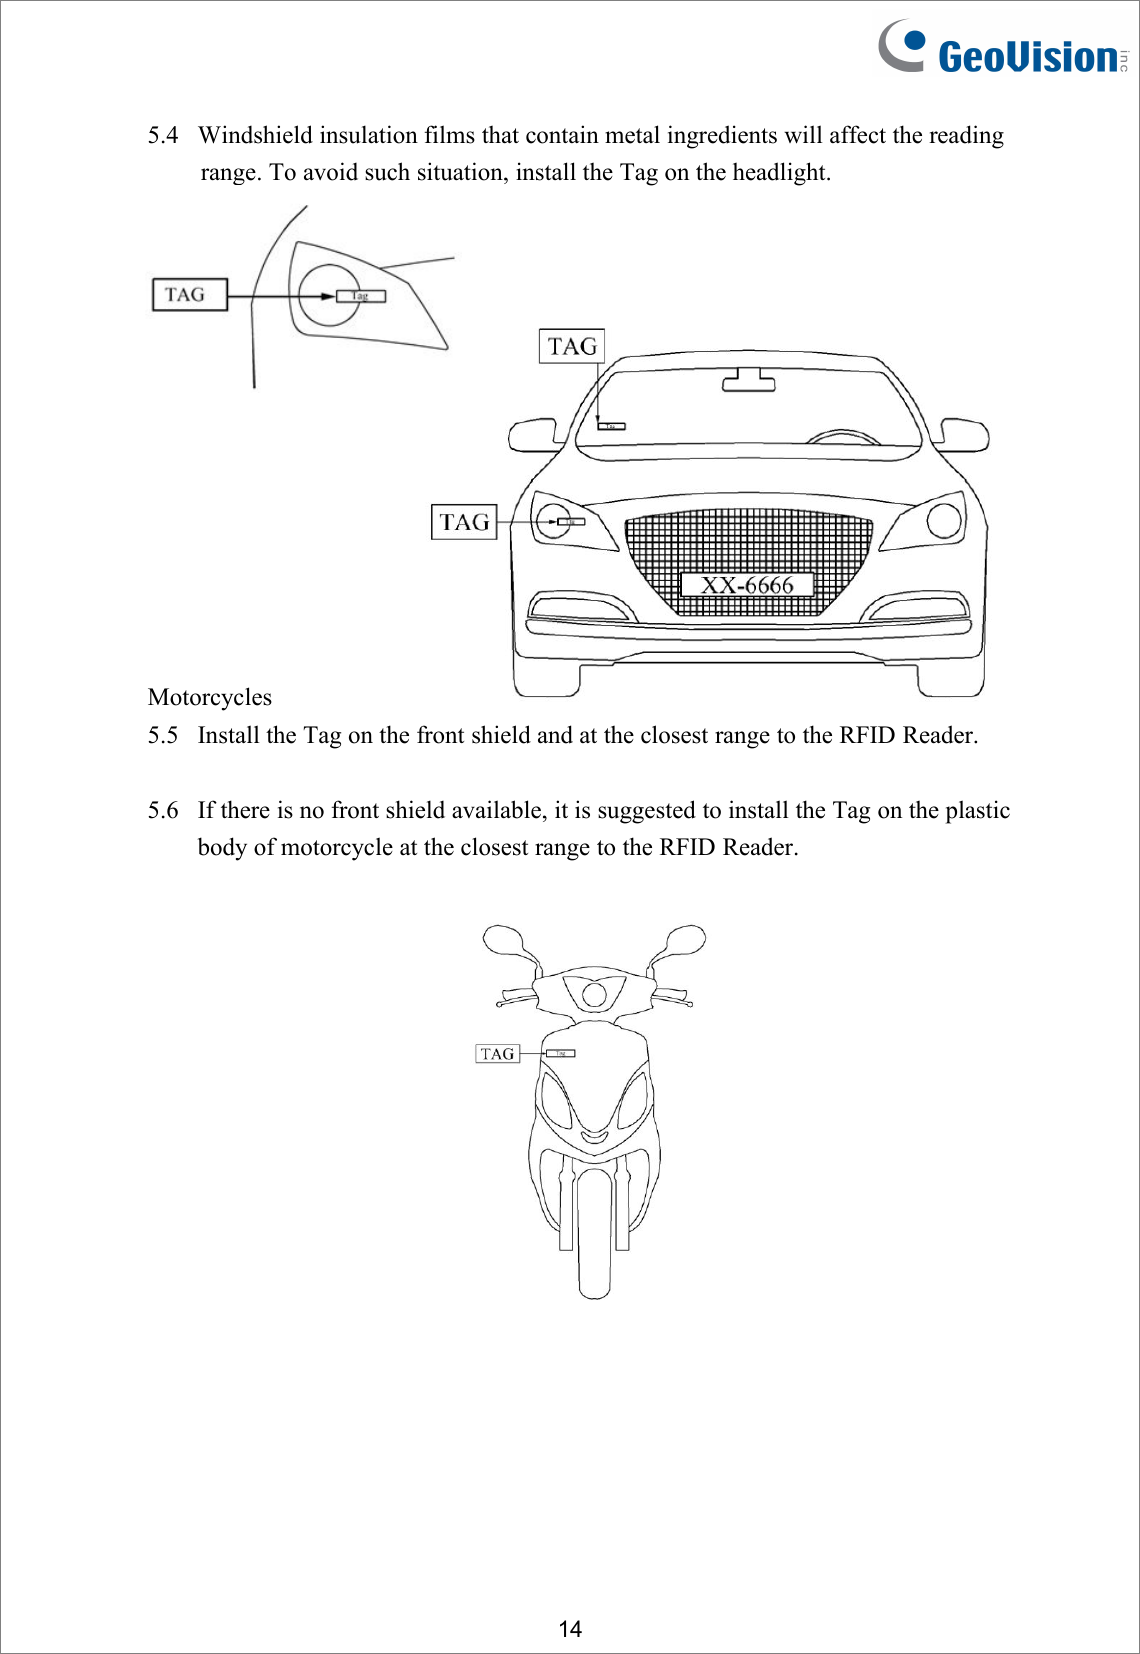 145.4 Windshield insulation films that contain metal ingredients will affect the readingrange. To avoid such situation, install the Tag on the headlight.Motorcycles5.5 Install the Tag on the front shield and at the closest range to the RFID Reader.5.6 If there is no front shield available, it is suggested to install the Tag on the plasticbody of motorcycle at the closest range to the RFID Reader.